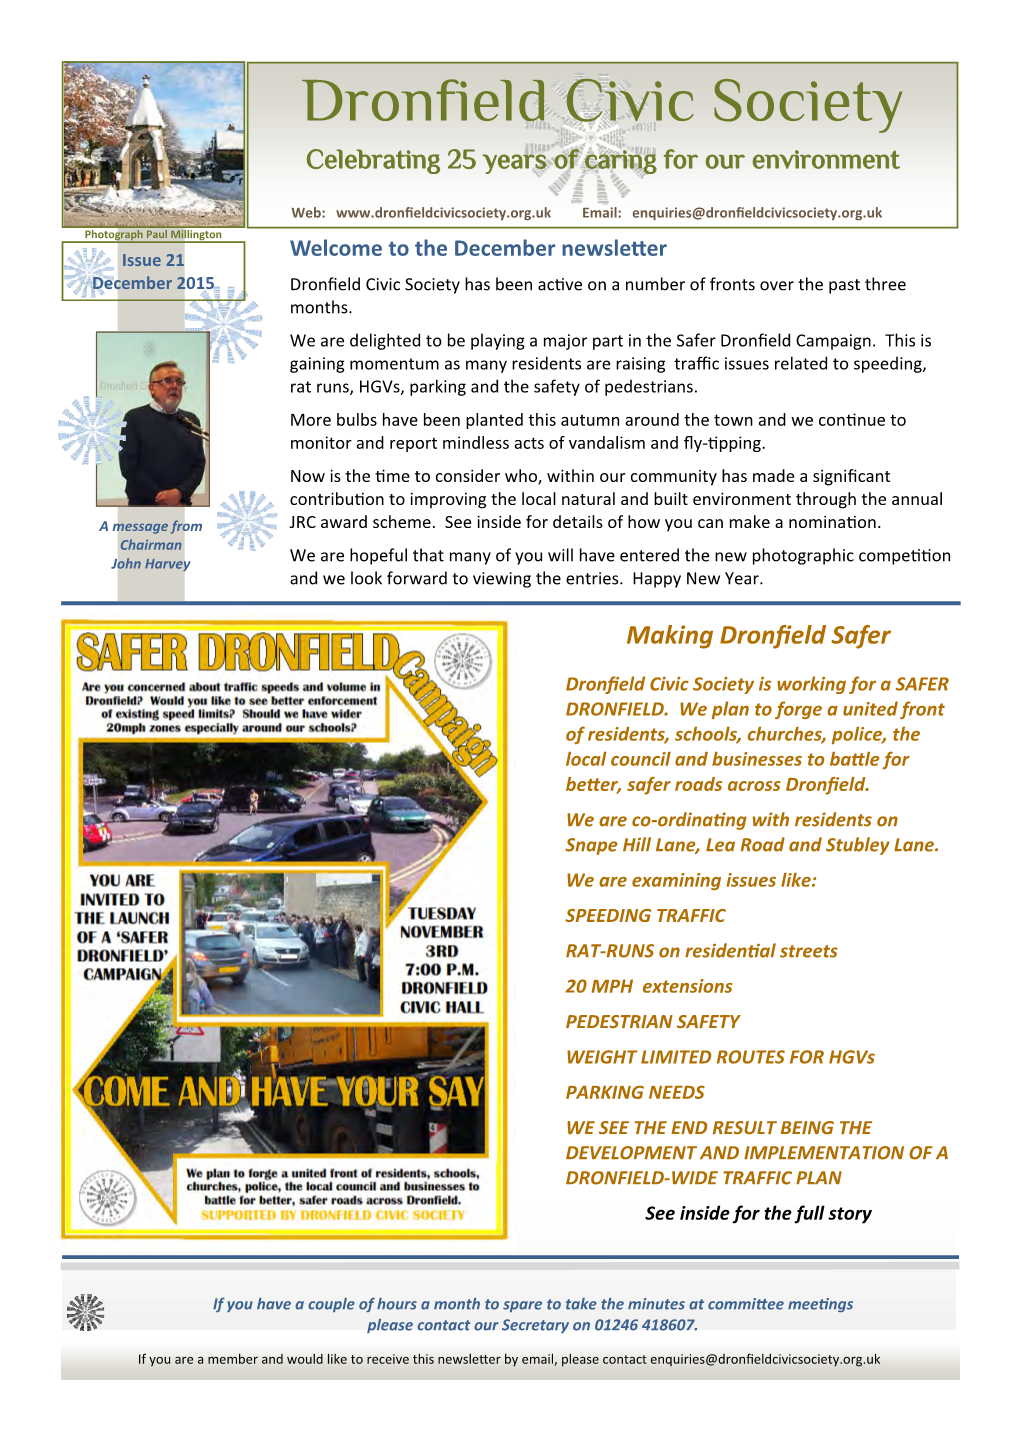 Download the Dronfield Civic Society Newsletter